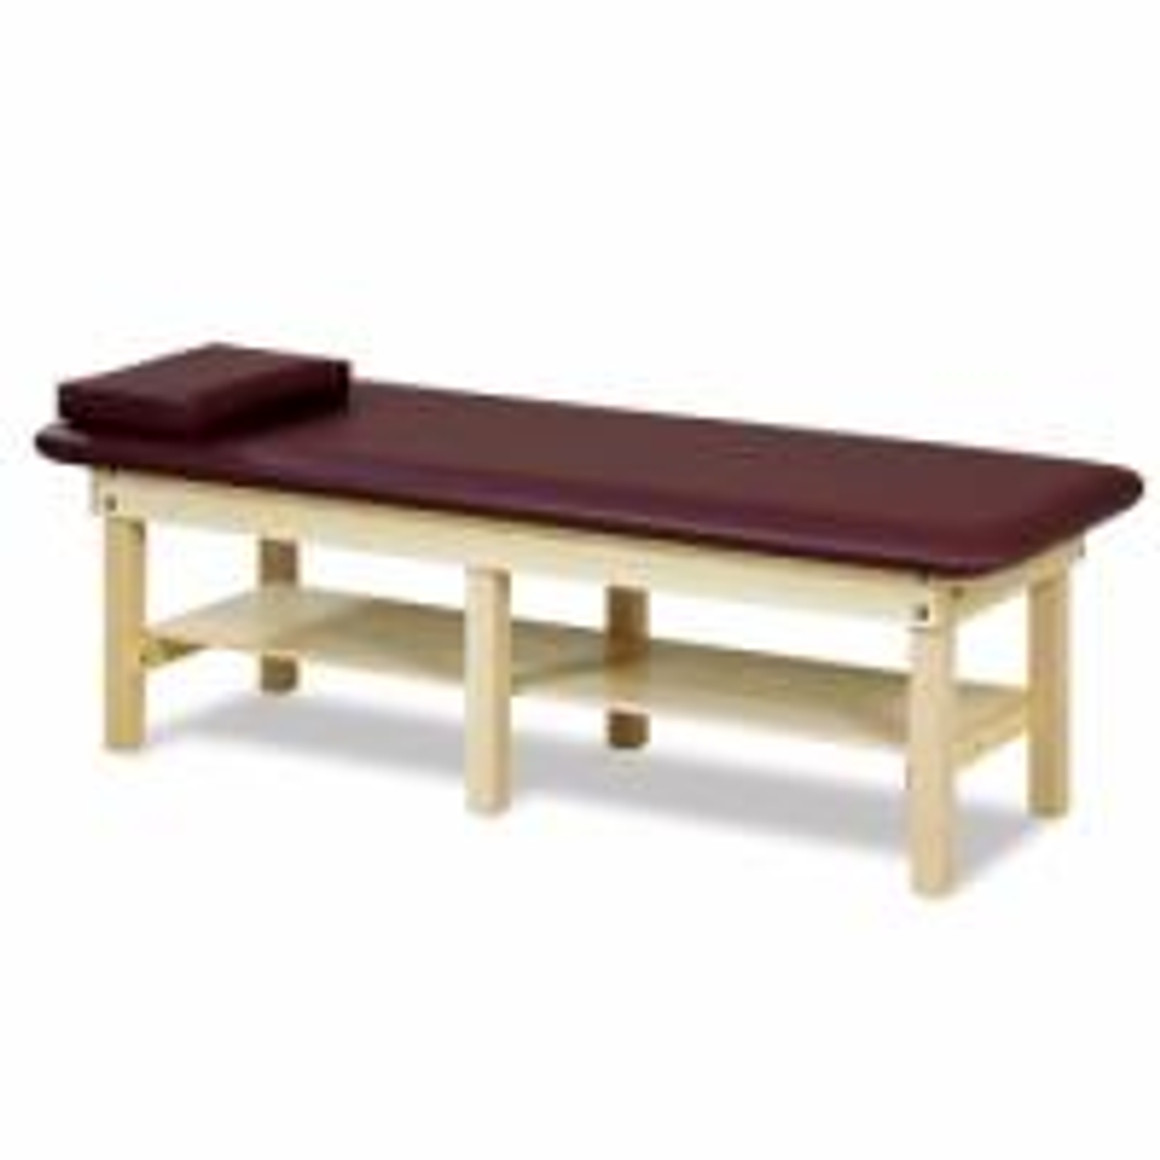 Clinton Low Height Bariatrics H-Brace Treatment Table, 26" High, Alabaster